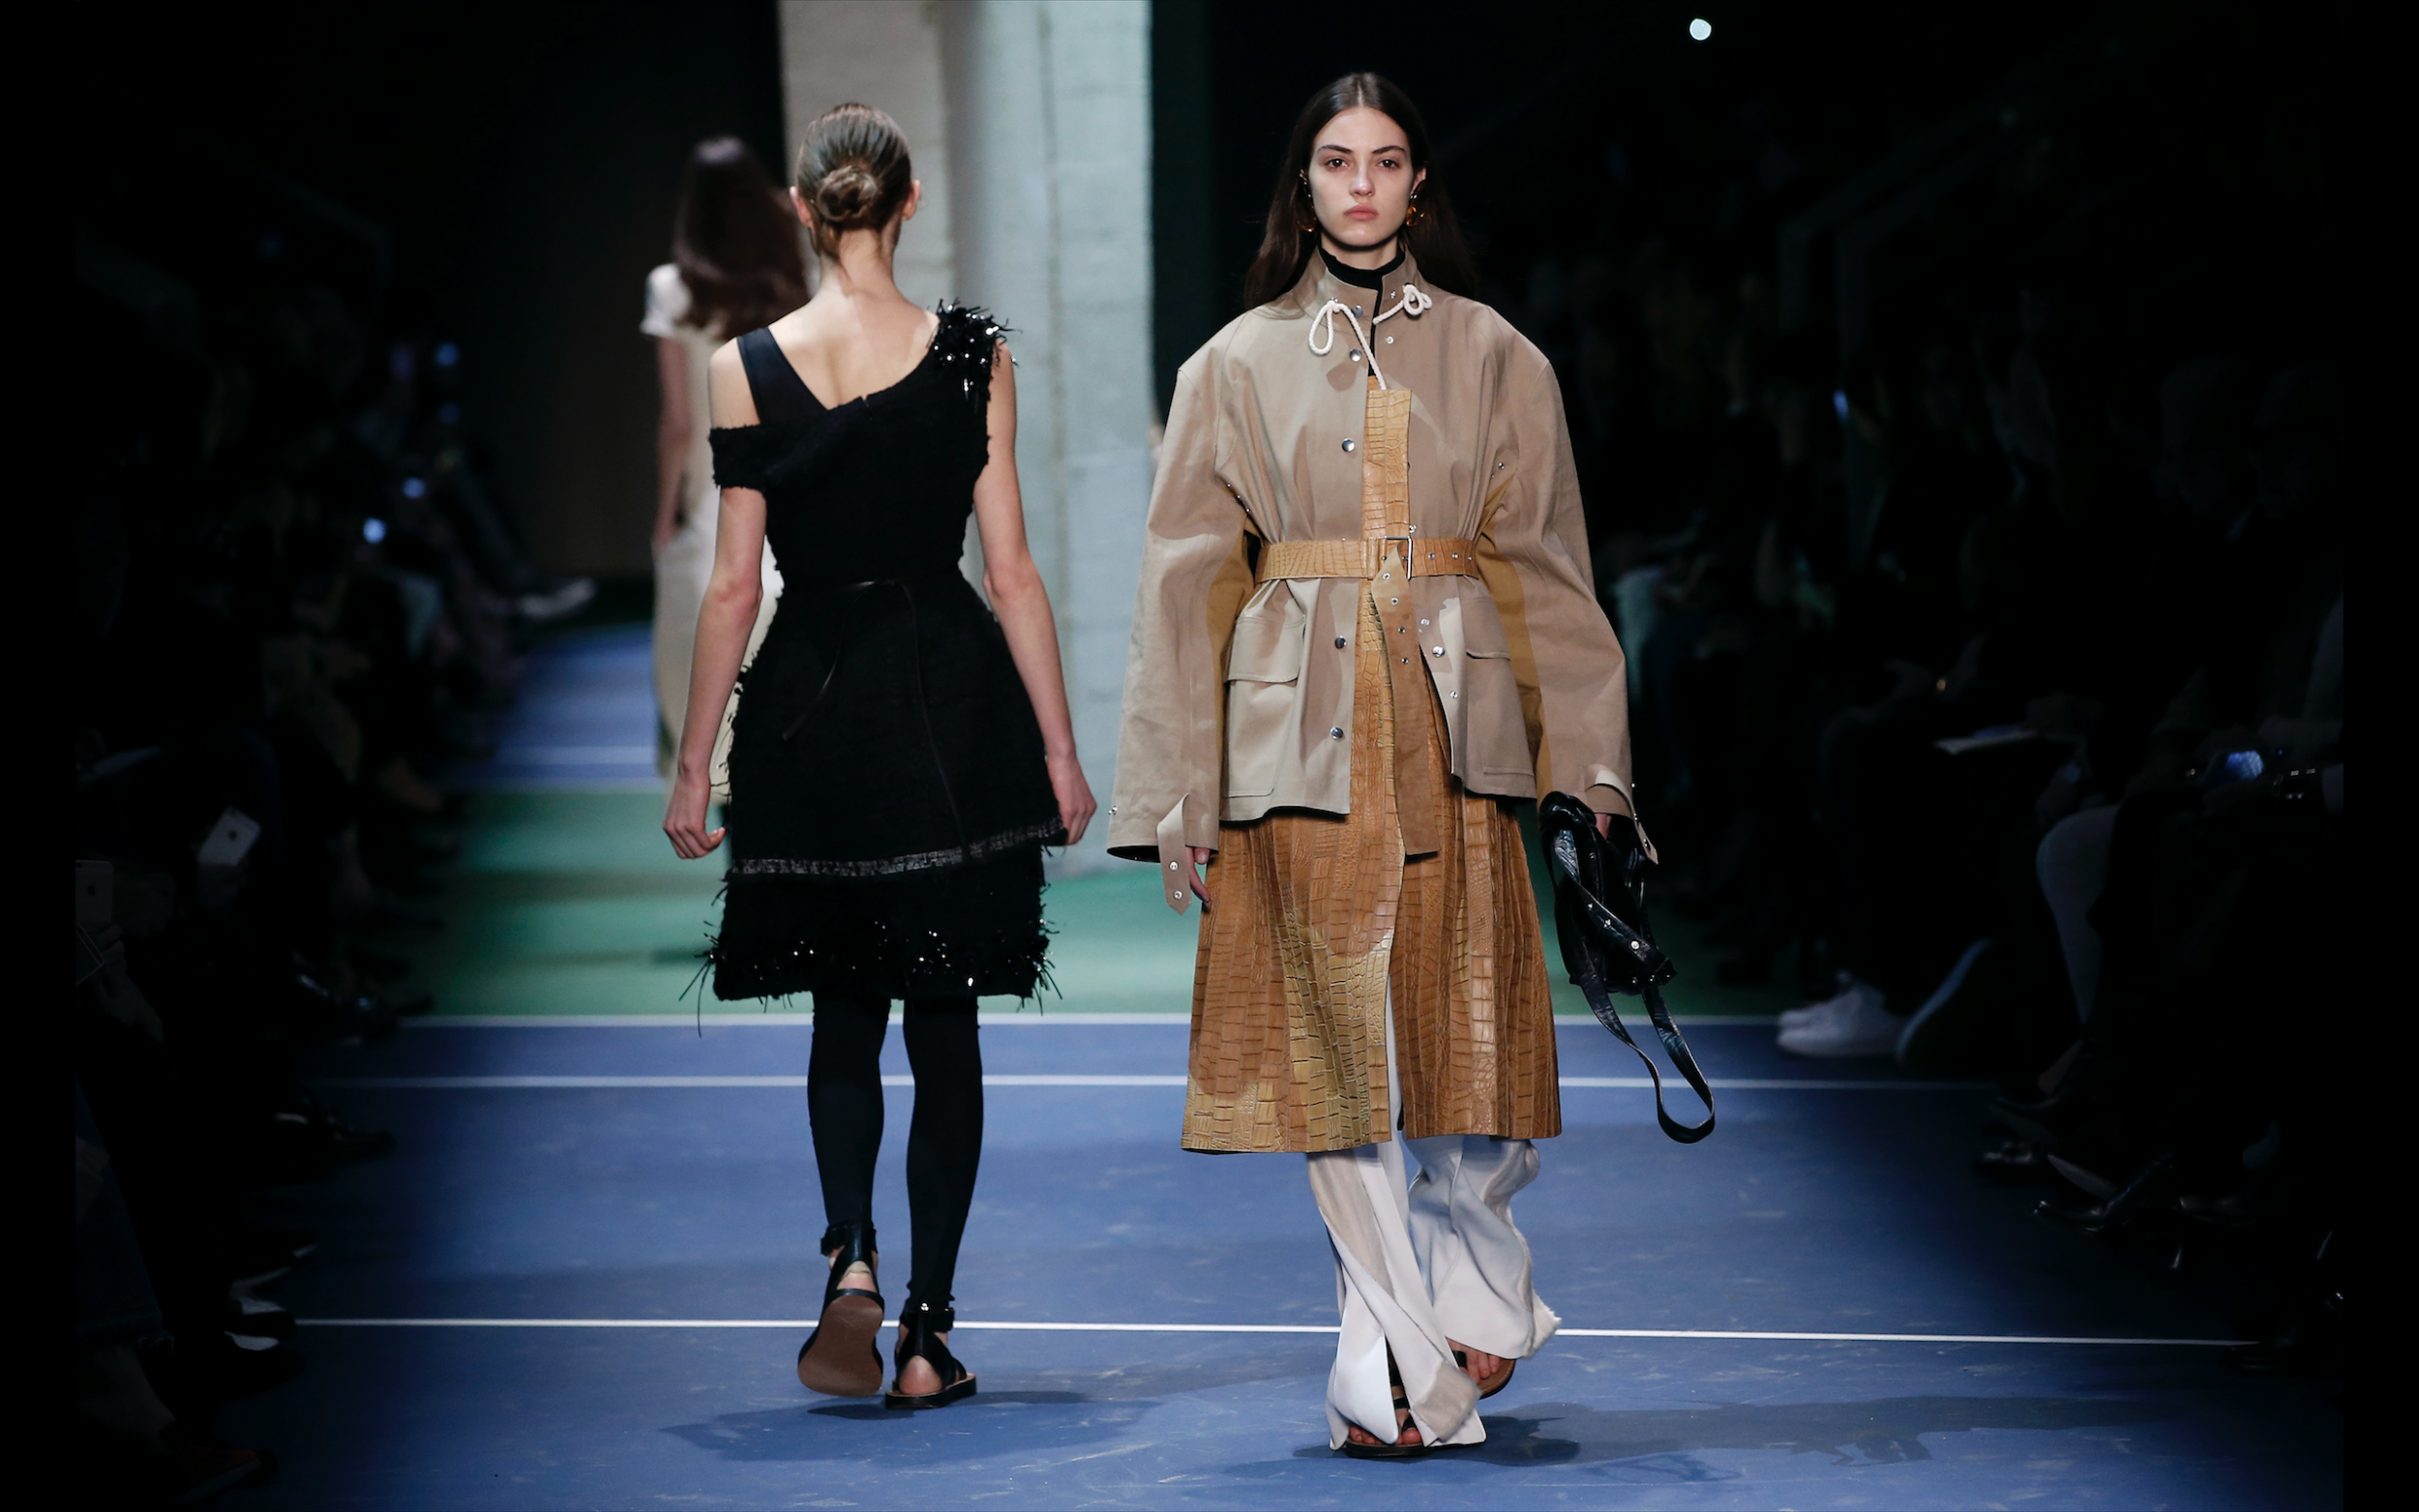 Clothes to forget about: Céline offers a serene wardrobe fit for